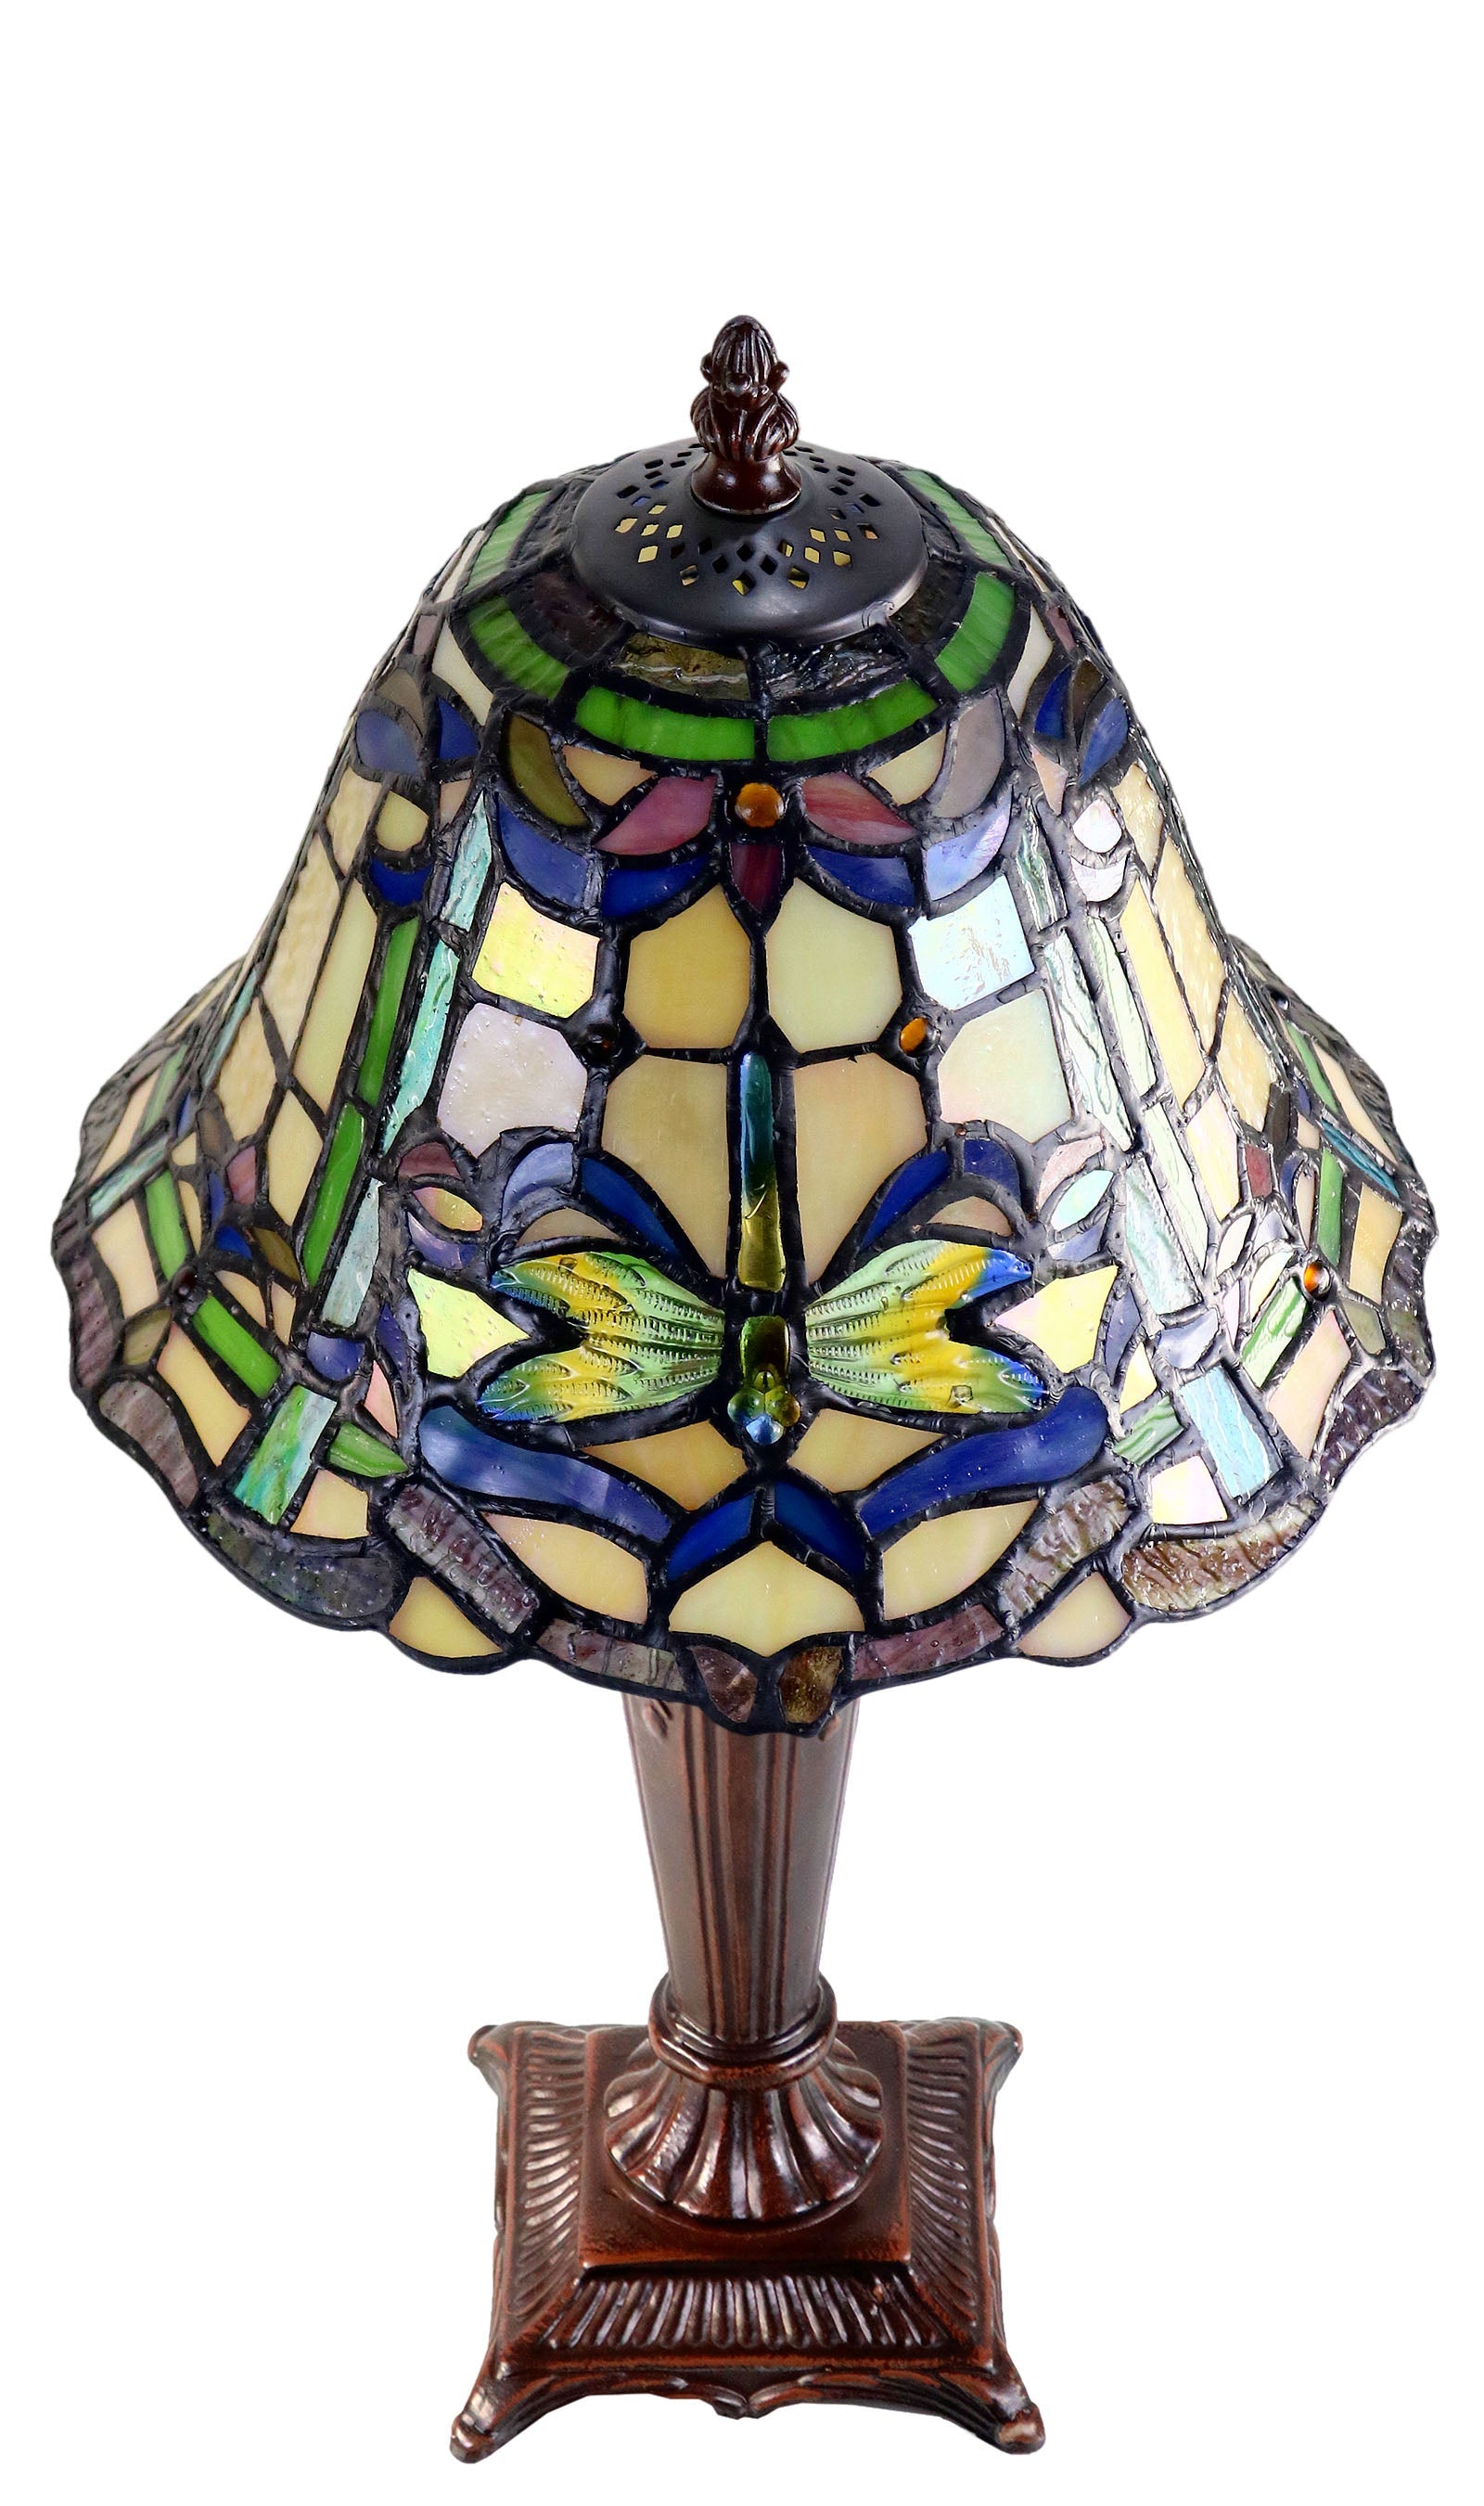 10"  Traditional Dragonfly Tiffany Style Stained Glass Table Lamp